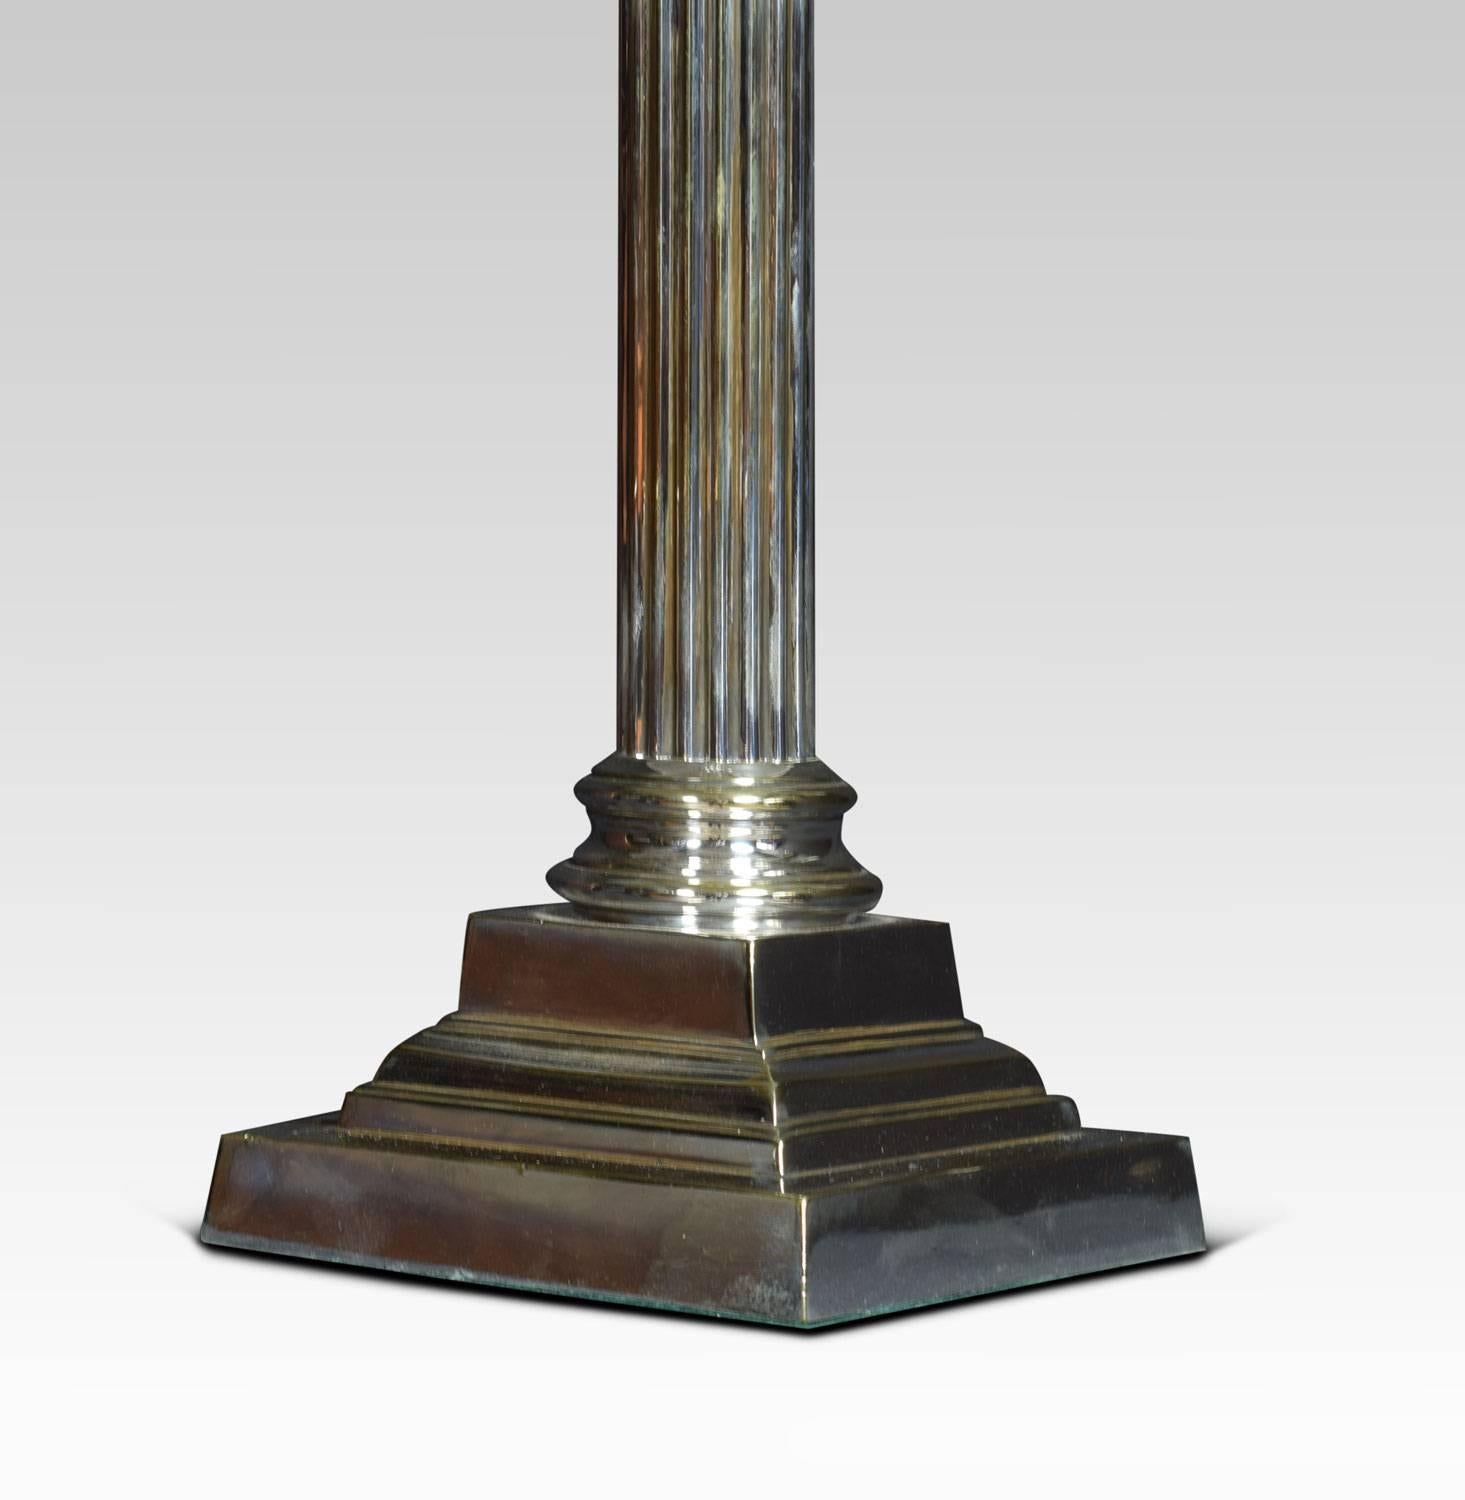 Edwardian table lamp, having Corinthian column on stepped square base.
Dimensions:
Height 21 inches
Width 6 inches
Depth 6 inches.